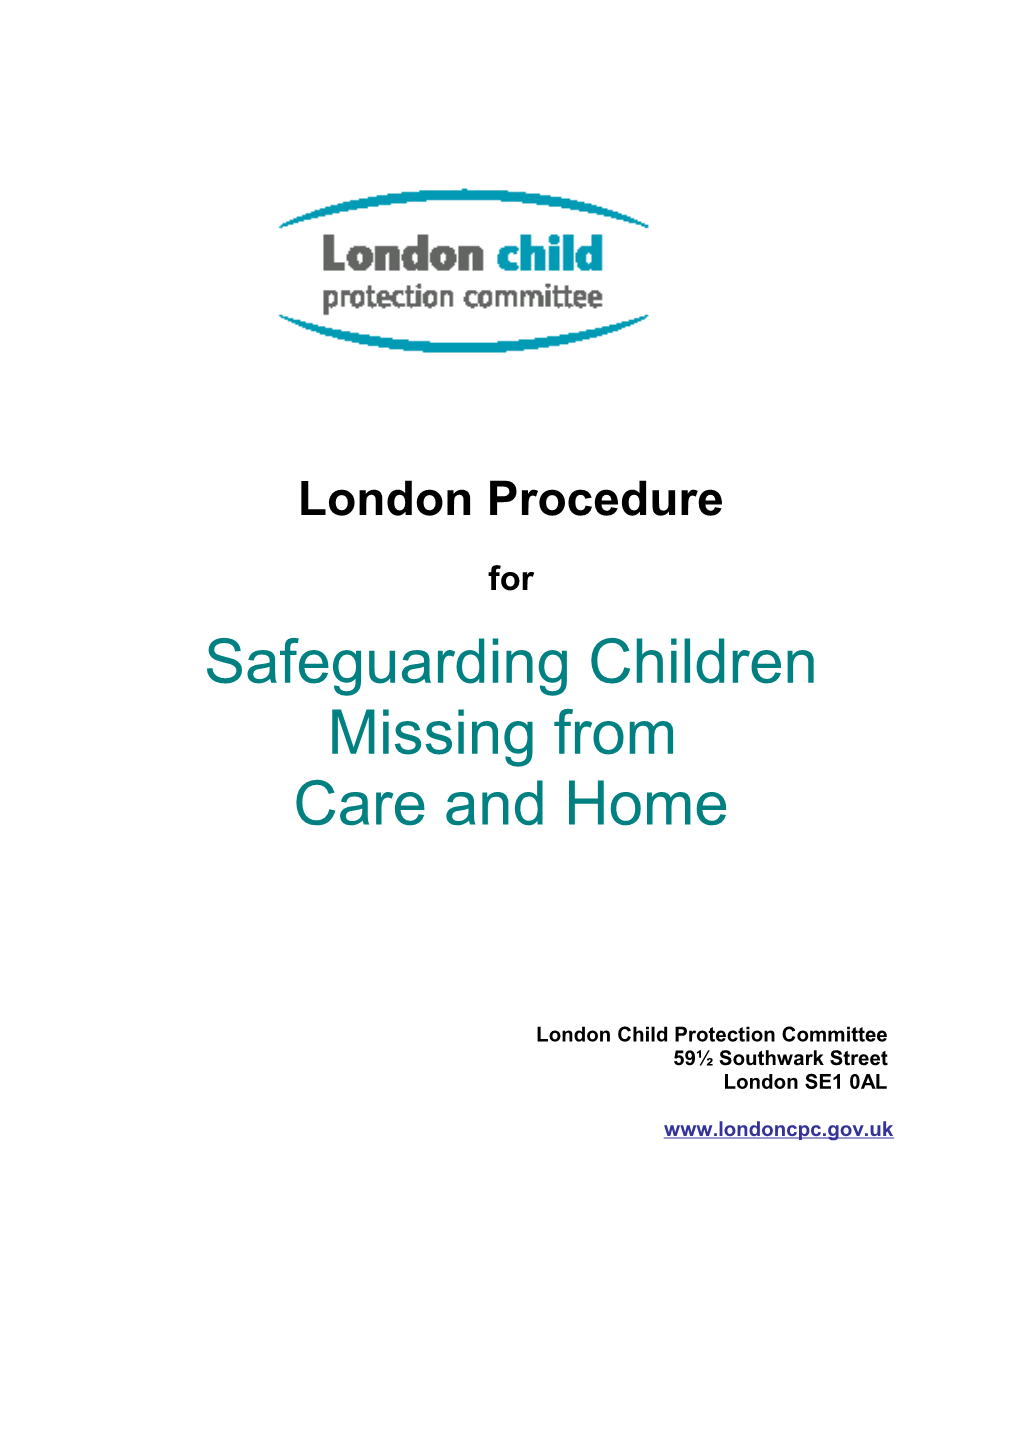 Children & Young People Missing from Care & Home in Croydon